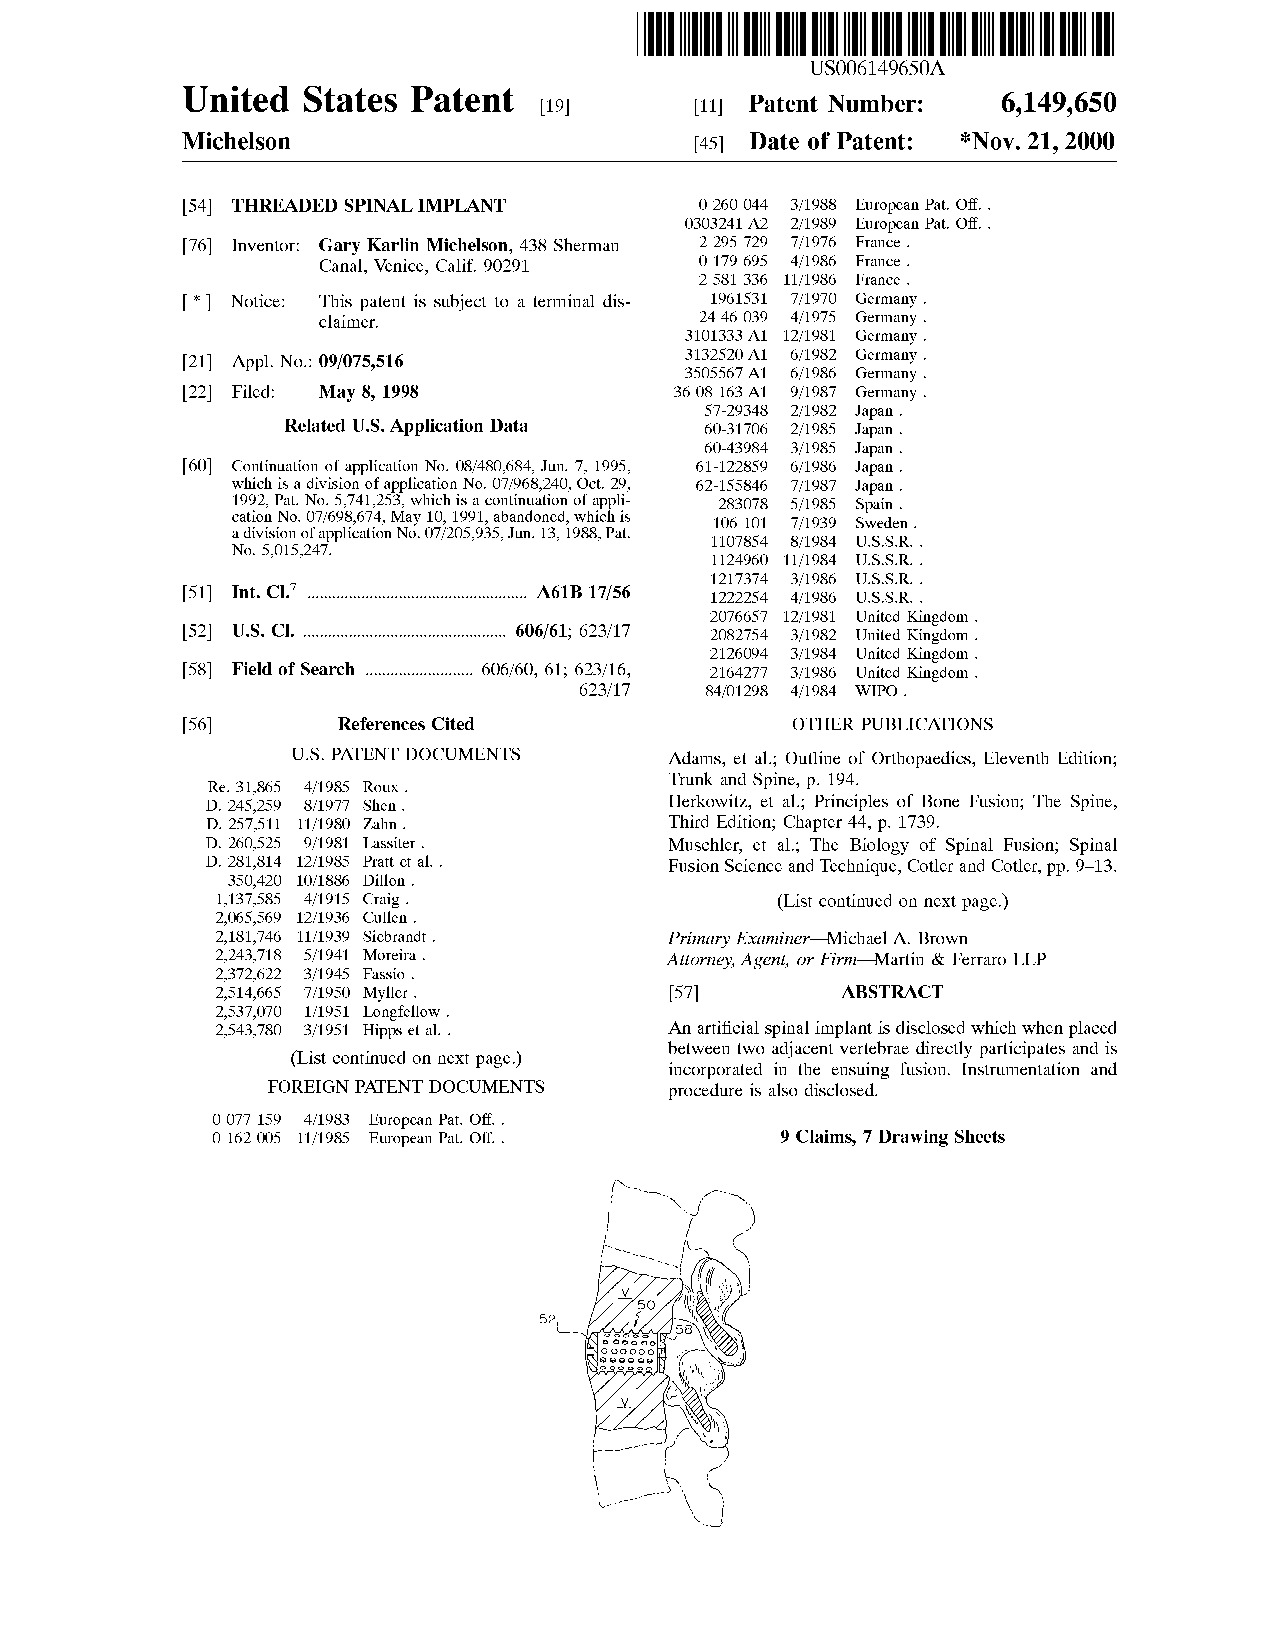 Threaded spinal implant - Patent 6,149,650